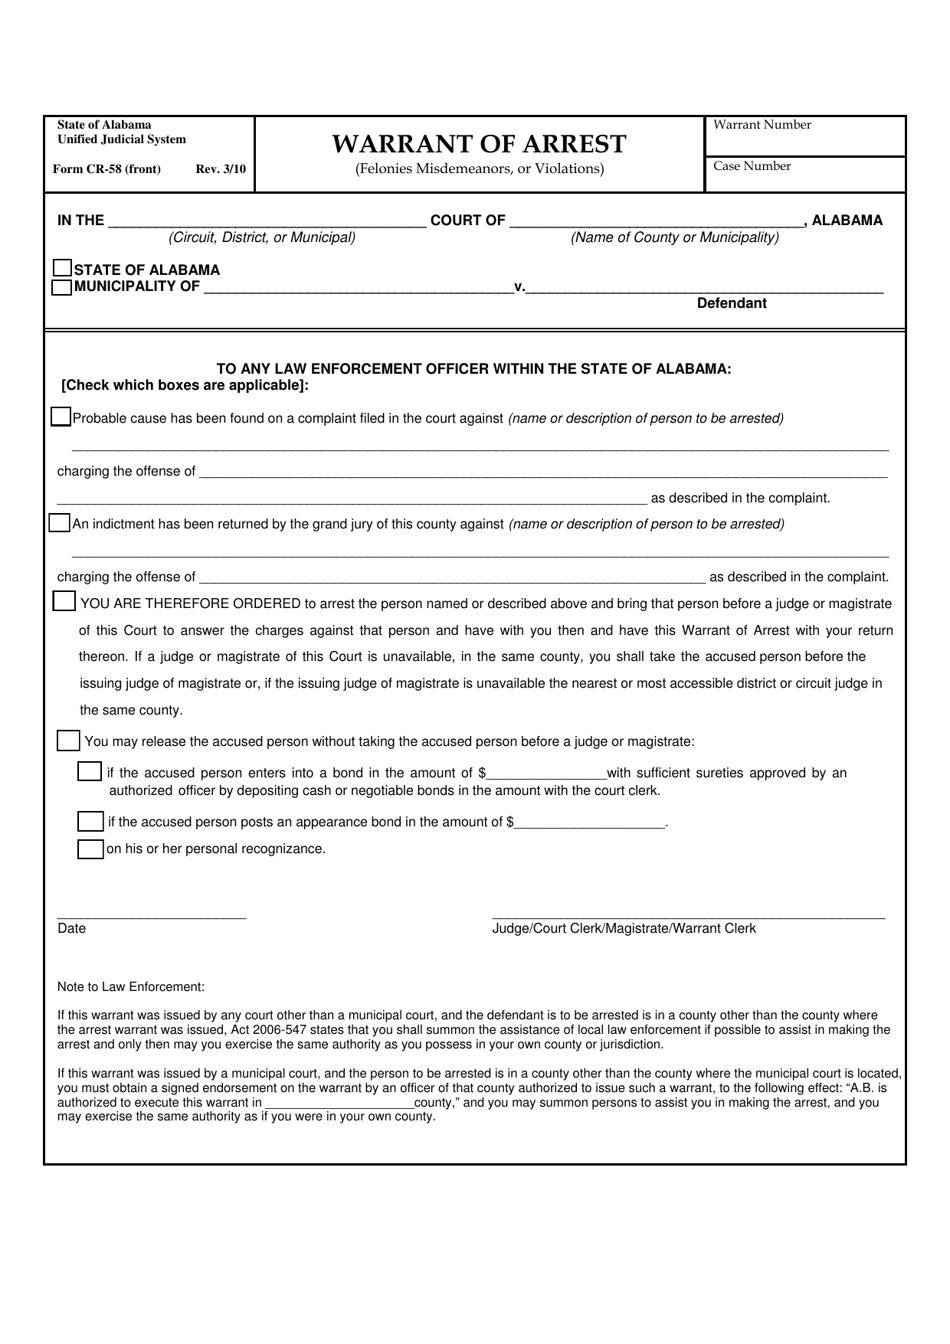 Form CR-58 Warrant of Arrest (Felonies Misdemeanors, or Violations) - Alabama, Page 1